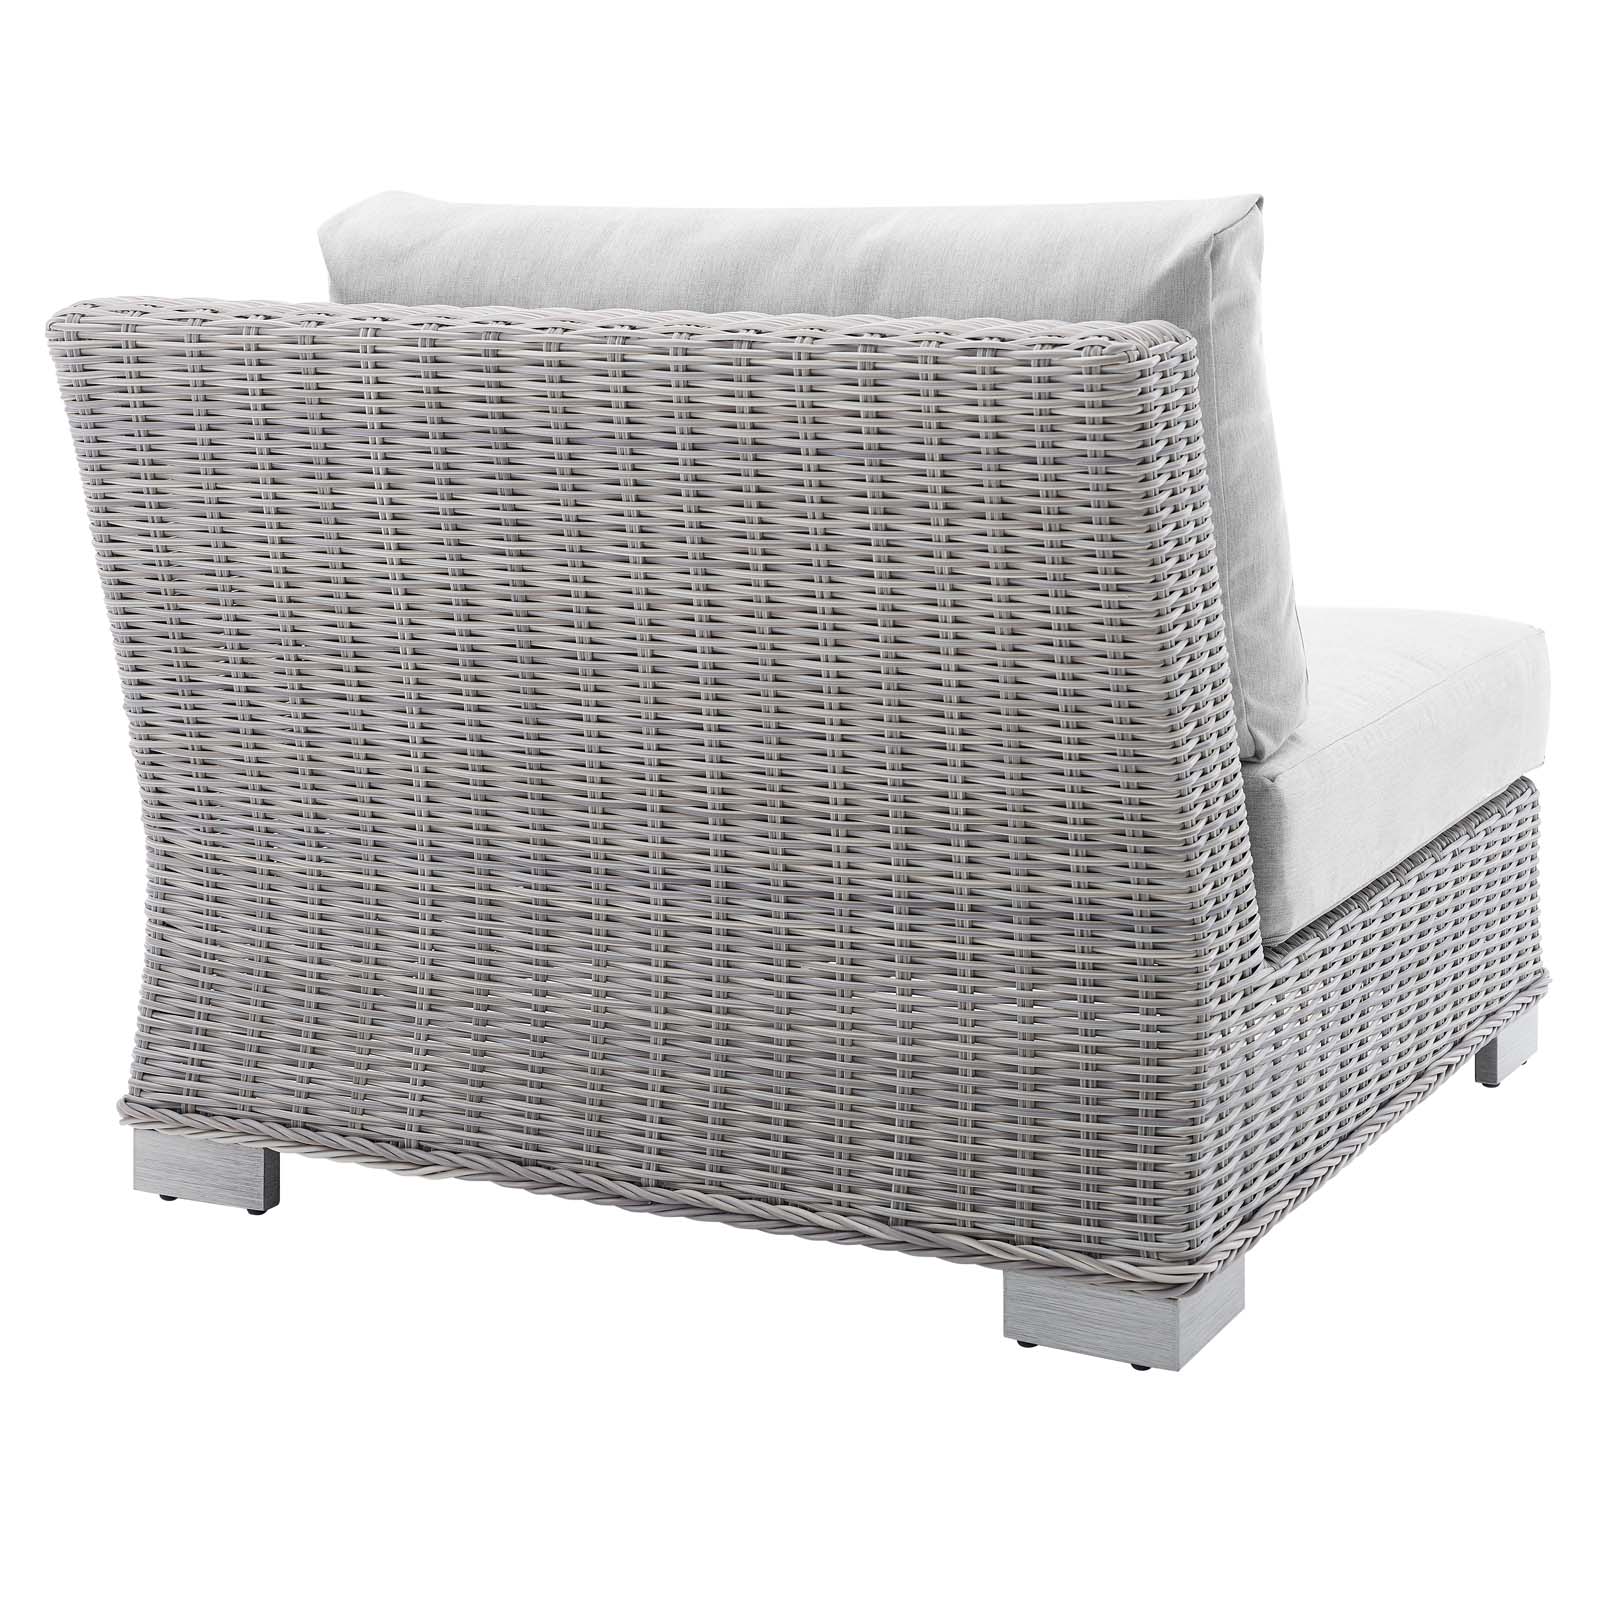 Modway Conway Sunbrella® Outdoor Patio Wicker Rattan Right-Arm Chair in Light Gray Gray - image 4 of 9